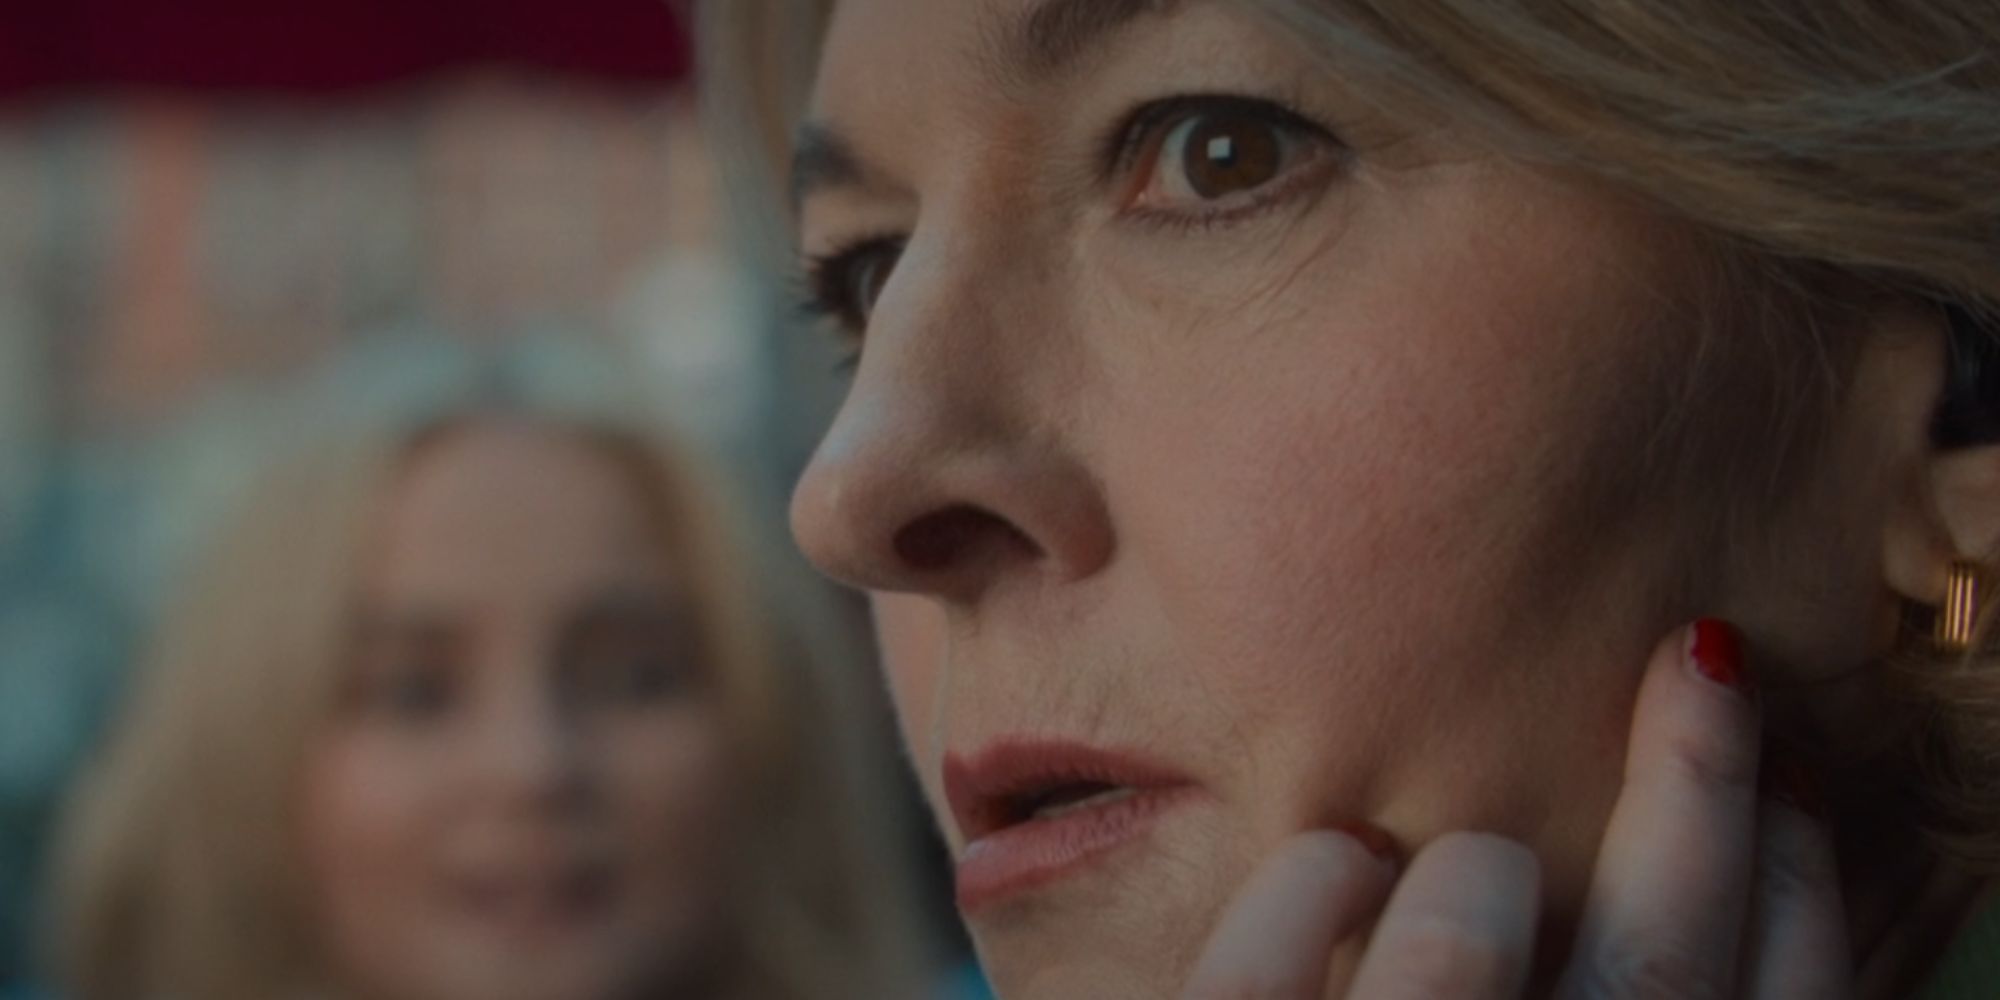 Jemma Redgrave looking furious as Kate Lethbridge-Stewart in Doctor Who